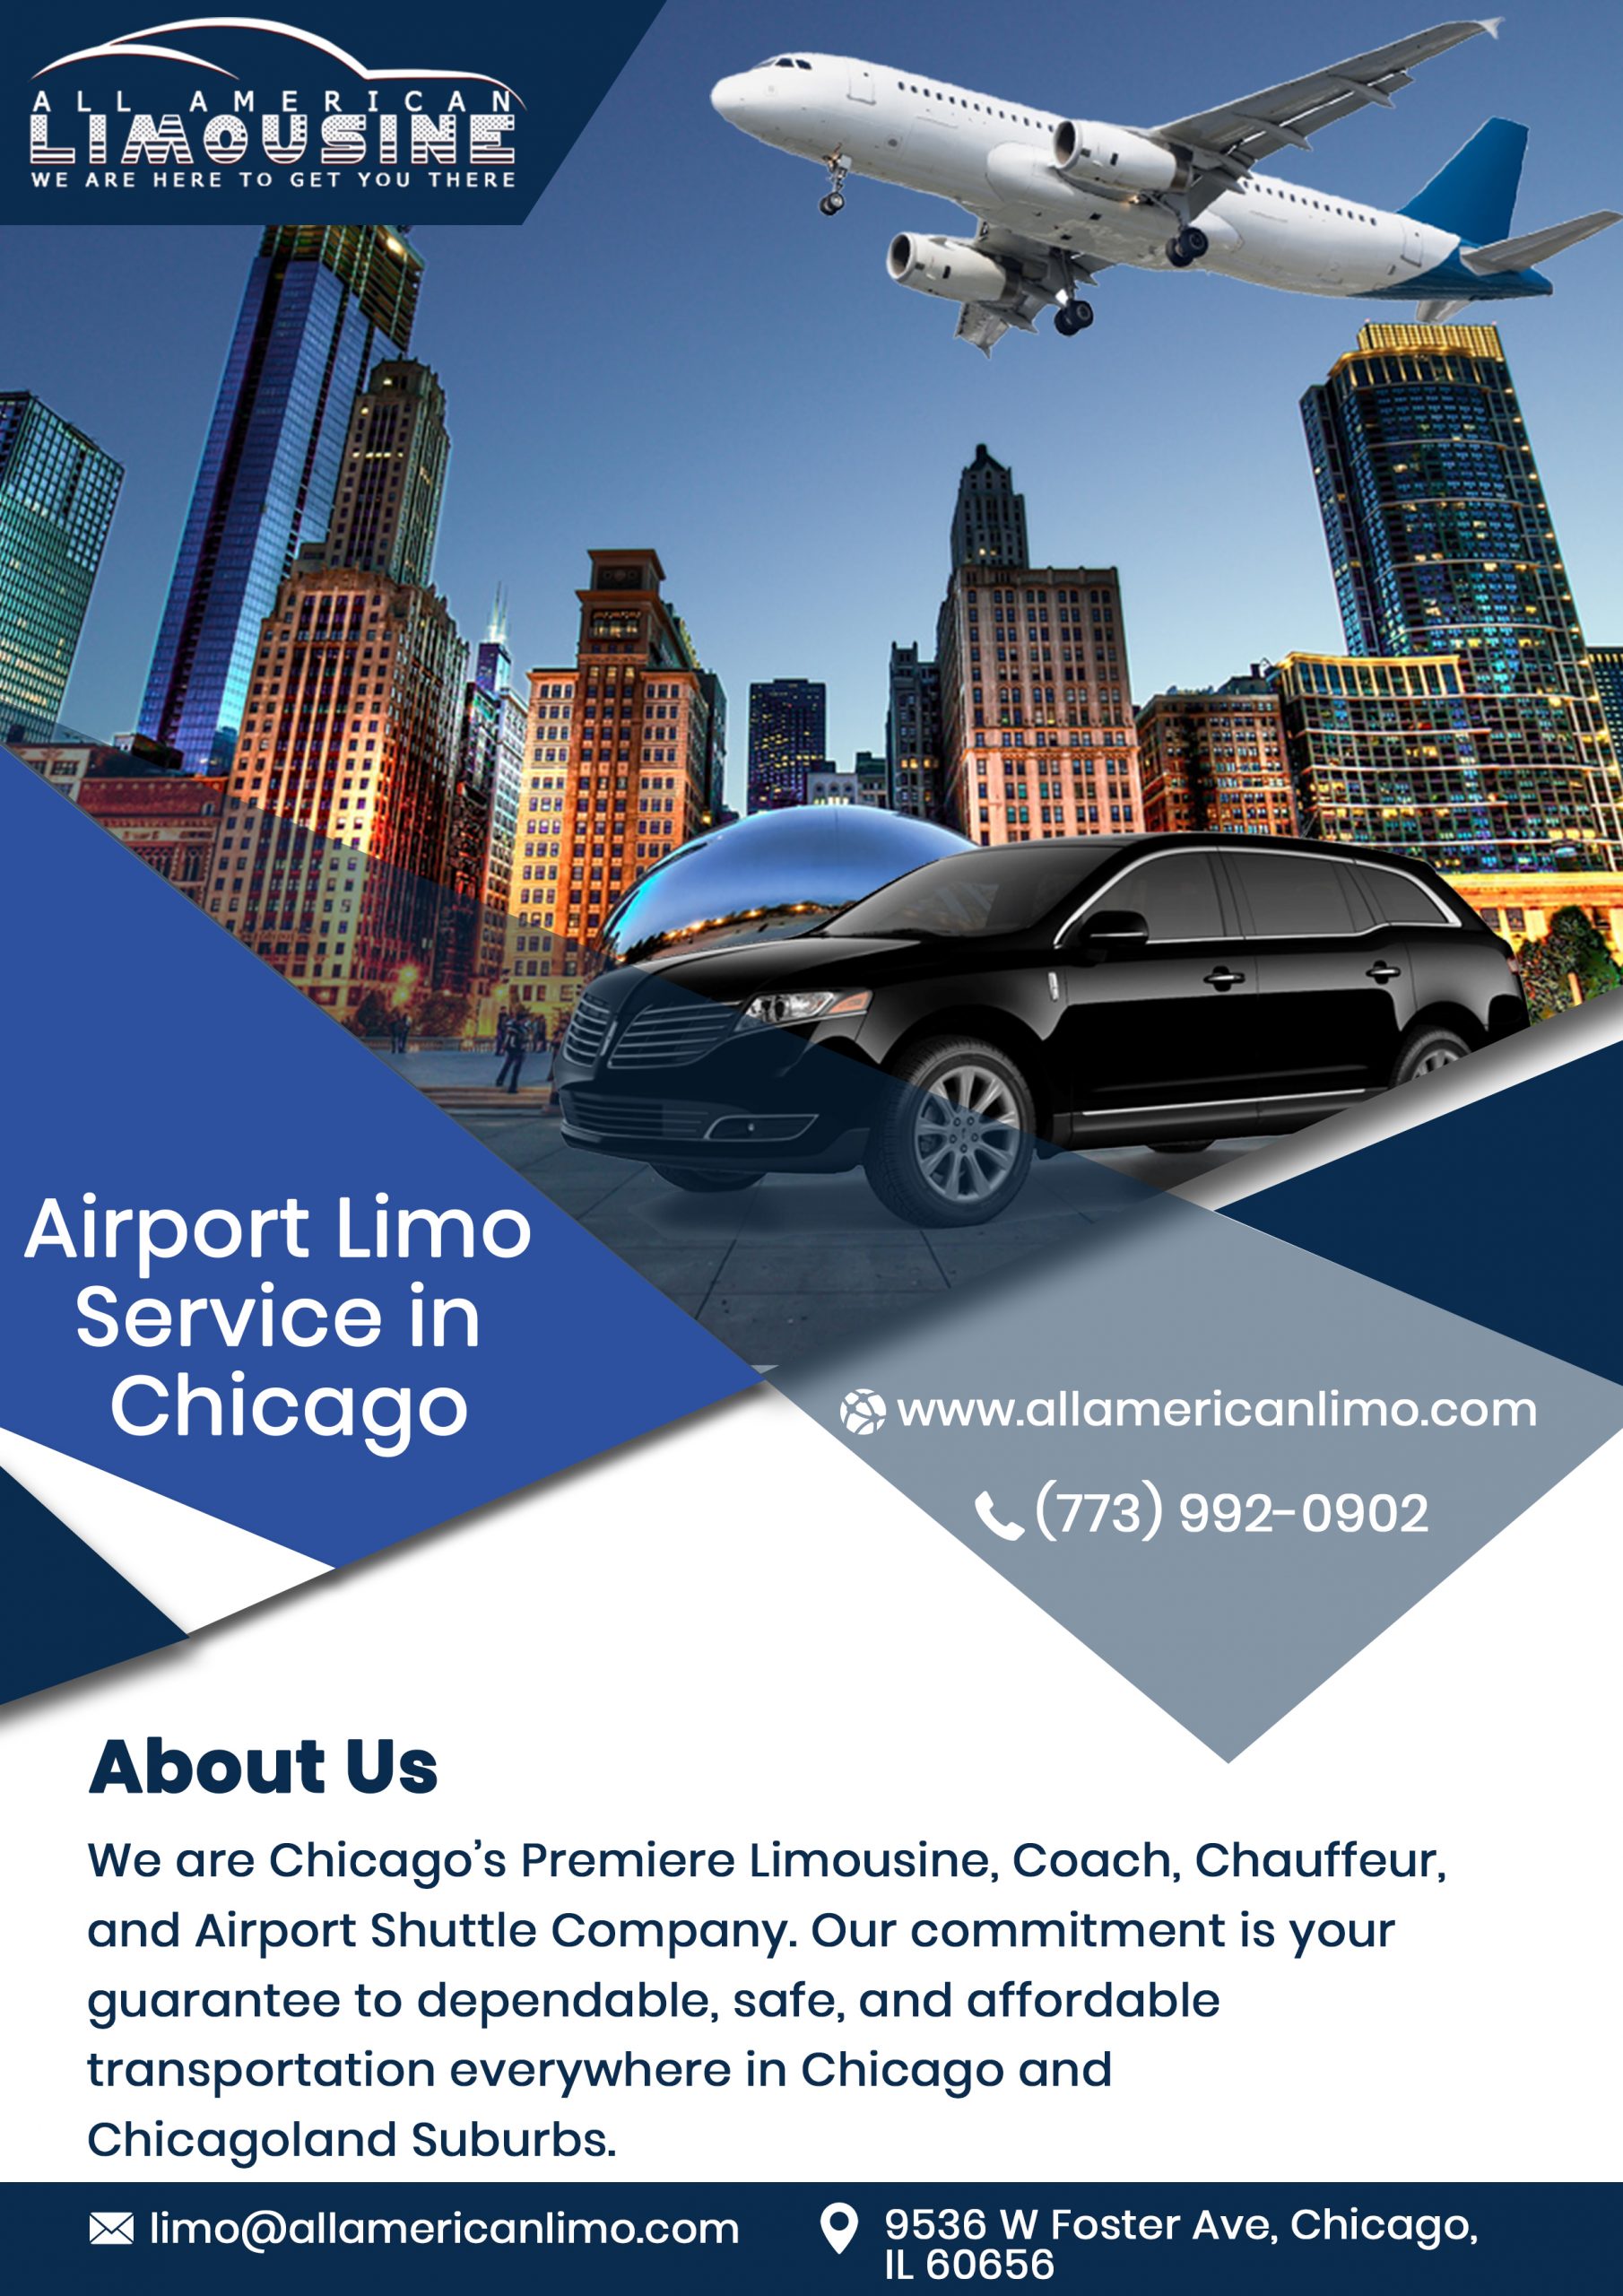 Chicago Car Service Near Me 60616, Party Bus 60616, Mercedes Sprinter Limo to 60616, Chicago Limo 60616, Limo Service 60616 to Airport, Hire, Rent, Get, Find, Car Service 60616 to Airport, Transportation Service 60616 to O'Hare, Corporate Travel 60616, Airport Travel 60616